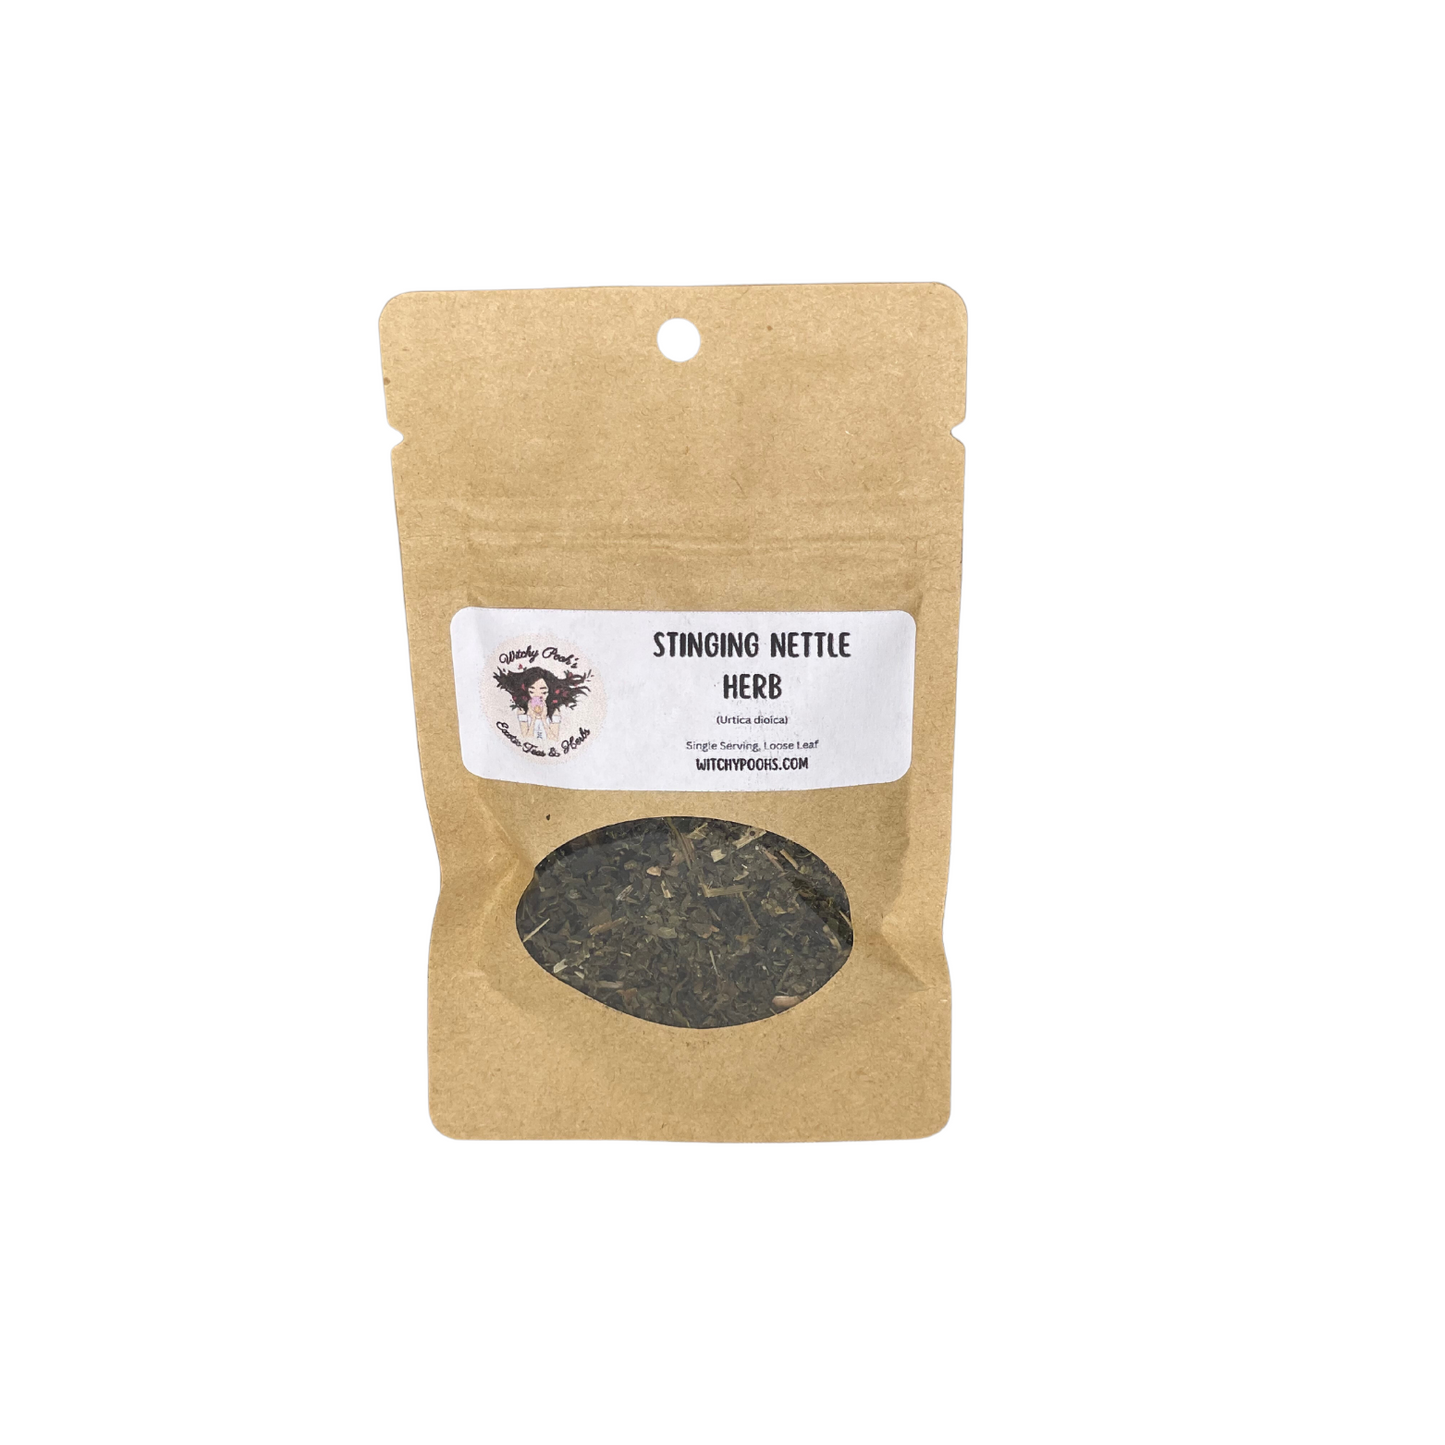 Stinging Nettle Leaf Herb, Nettle Leaf, Dried Herbs, Food Grade Herbs, Herbs and Spices, Loose Leaf Herbs